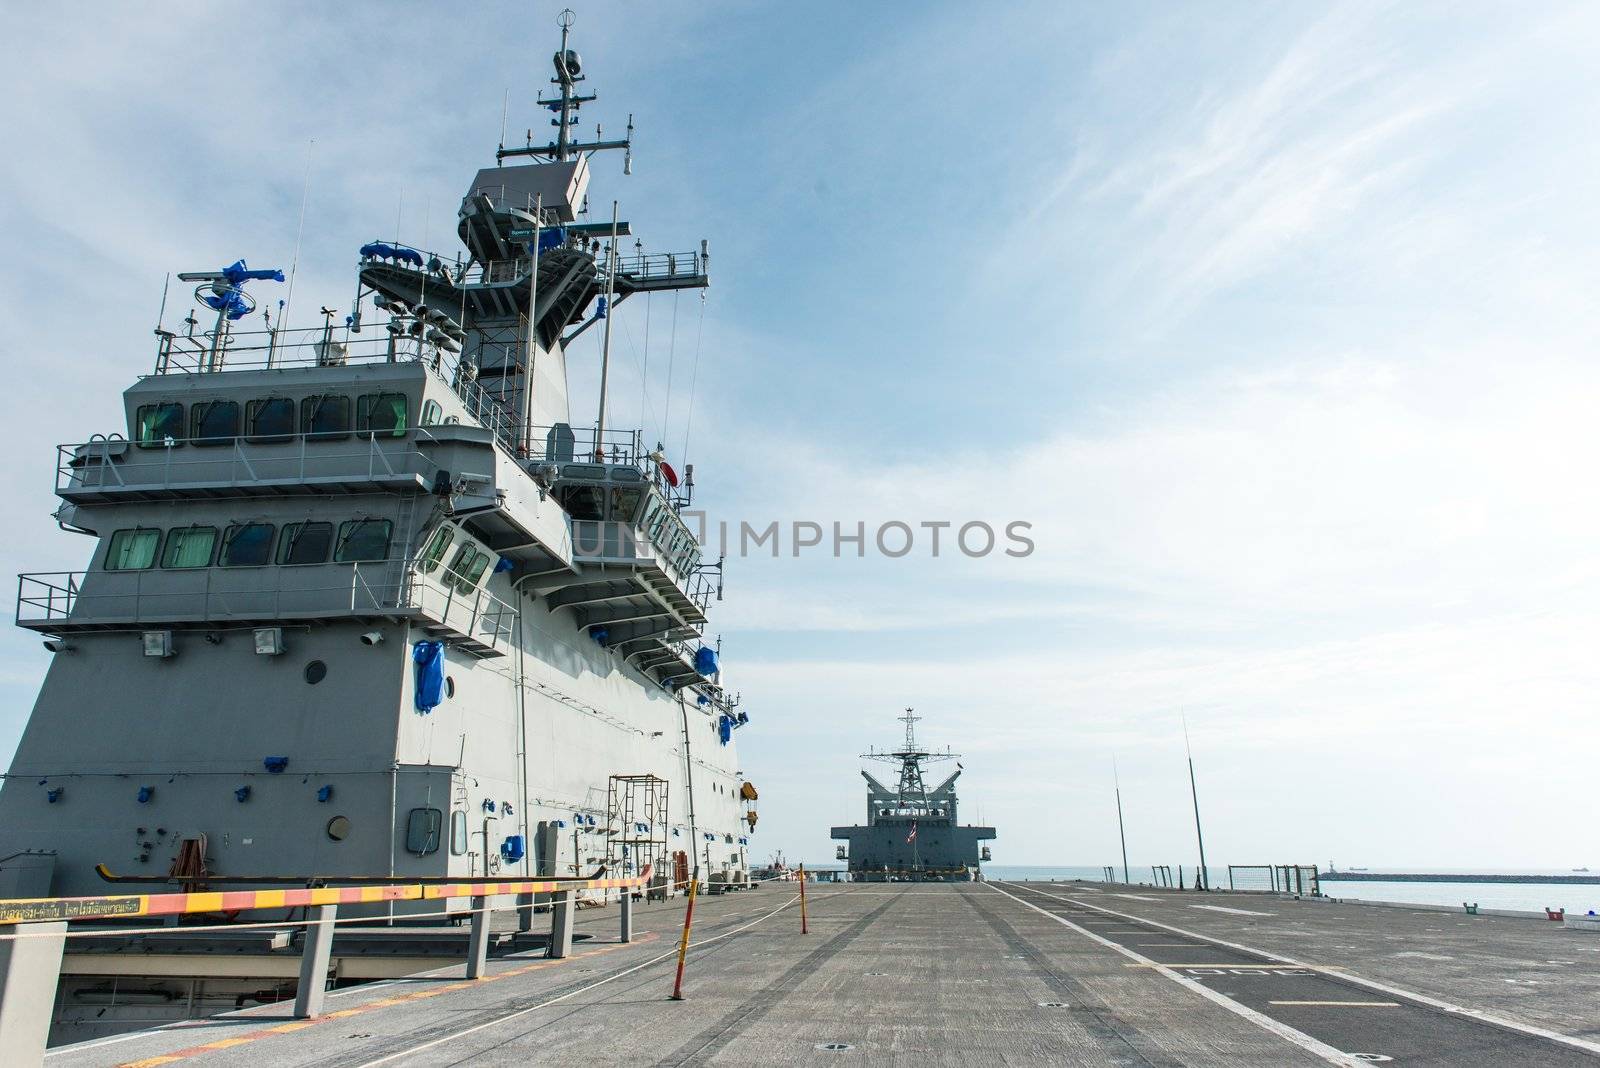 Large battle ship in Naval base by sasilsolutions